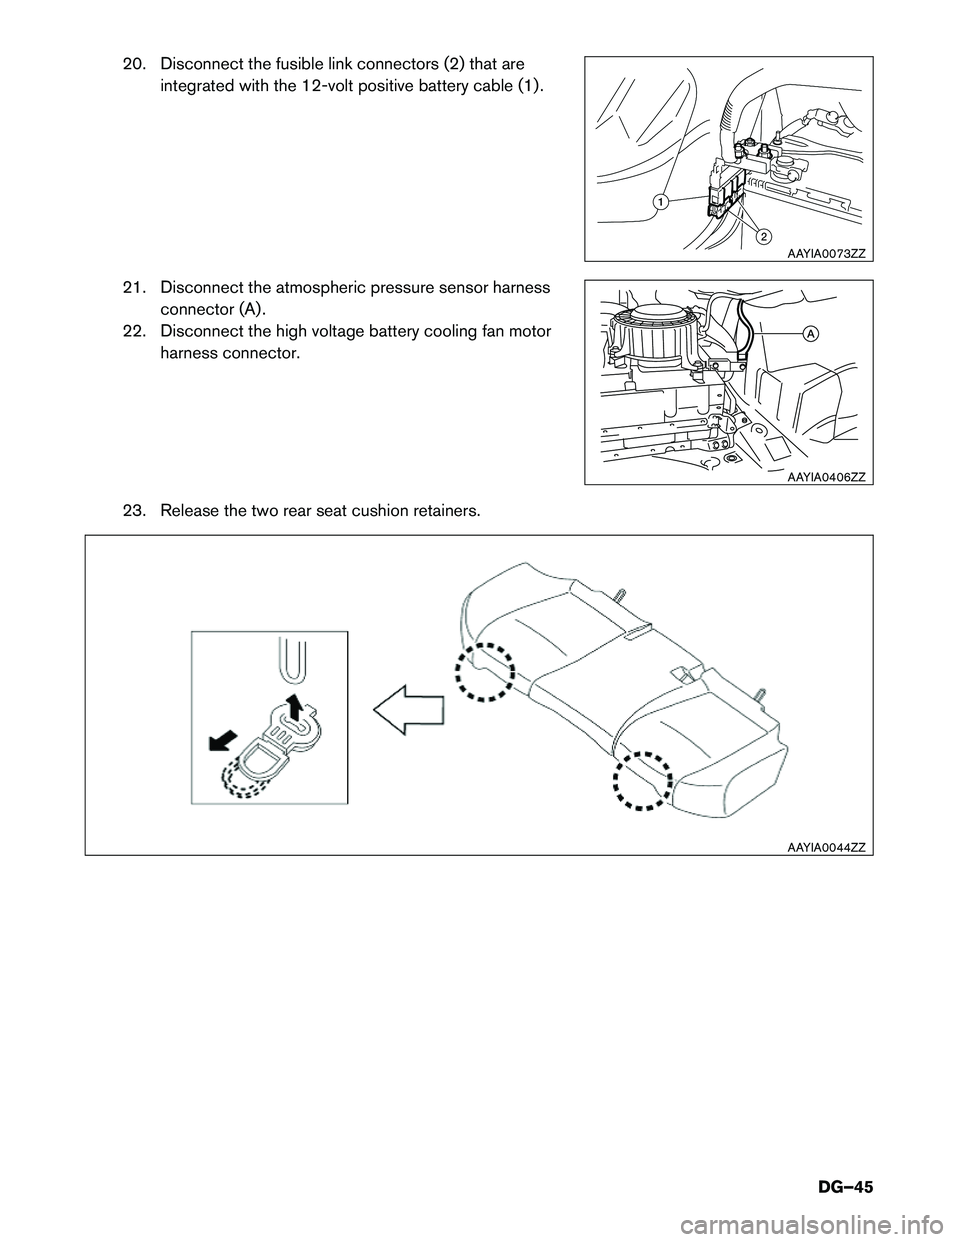 INFINITI Q70 HYBRID 2016  Dismantling Guide 20. Disconnect the fusible link connectors (2) that areintegrated with the 12-volt positive battery cable (1) .
21. Disconnect the atmospheric pressure sensor harness connector (A) .
22. Disconnect th